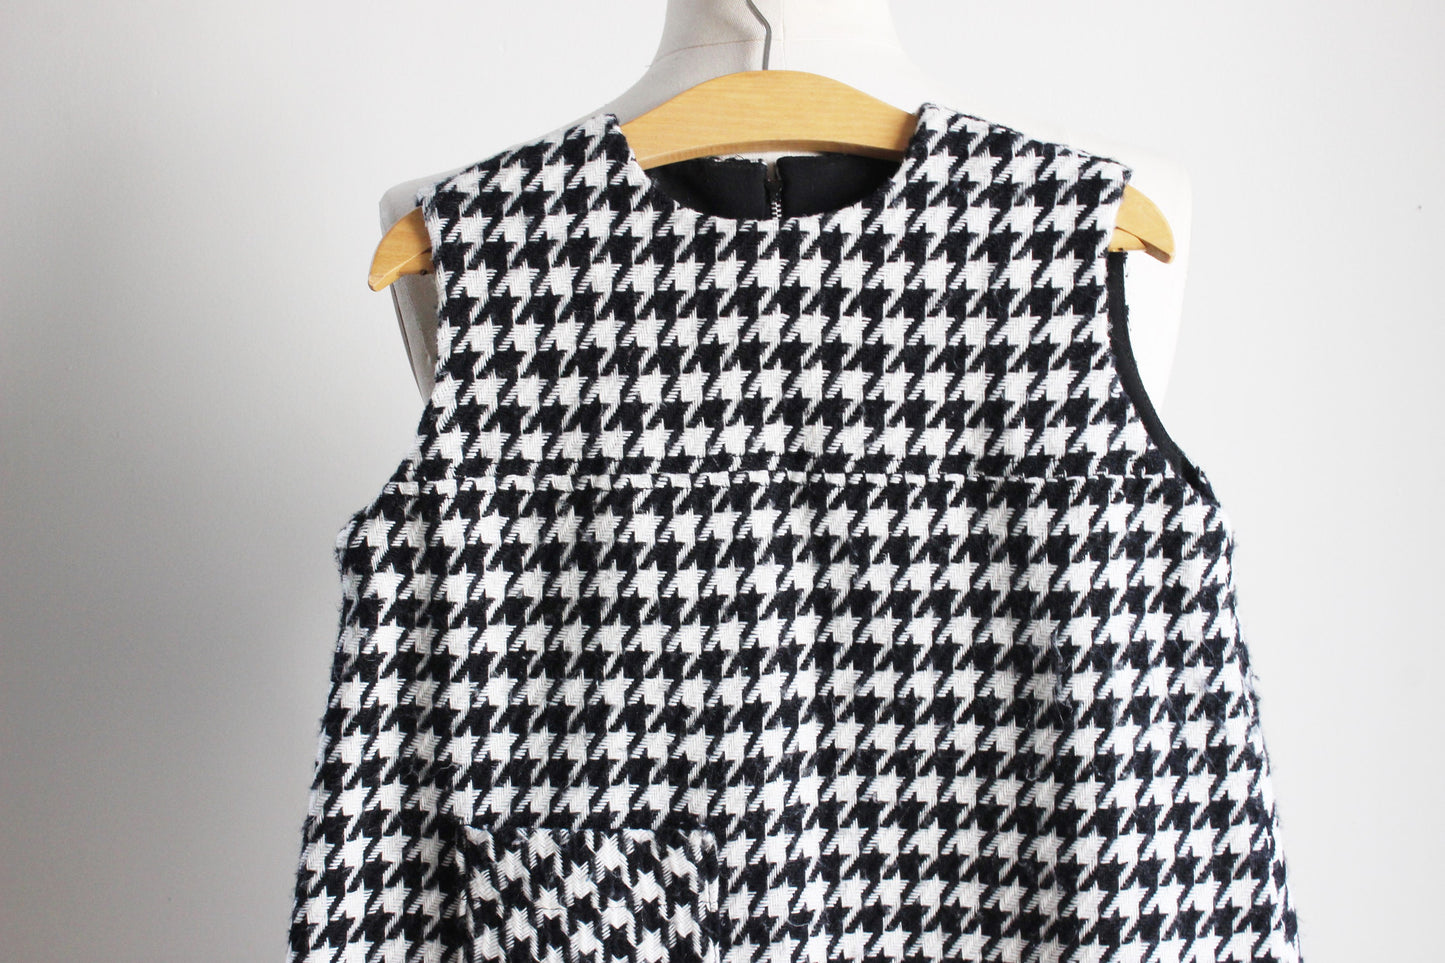 Vintage 1960s Toddler Girls Mod Dress, Houndstooth Check In Black And White